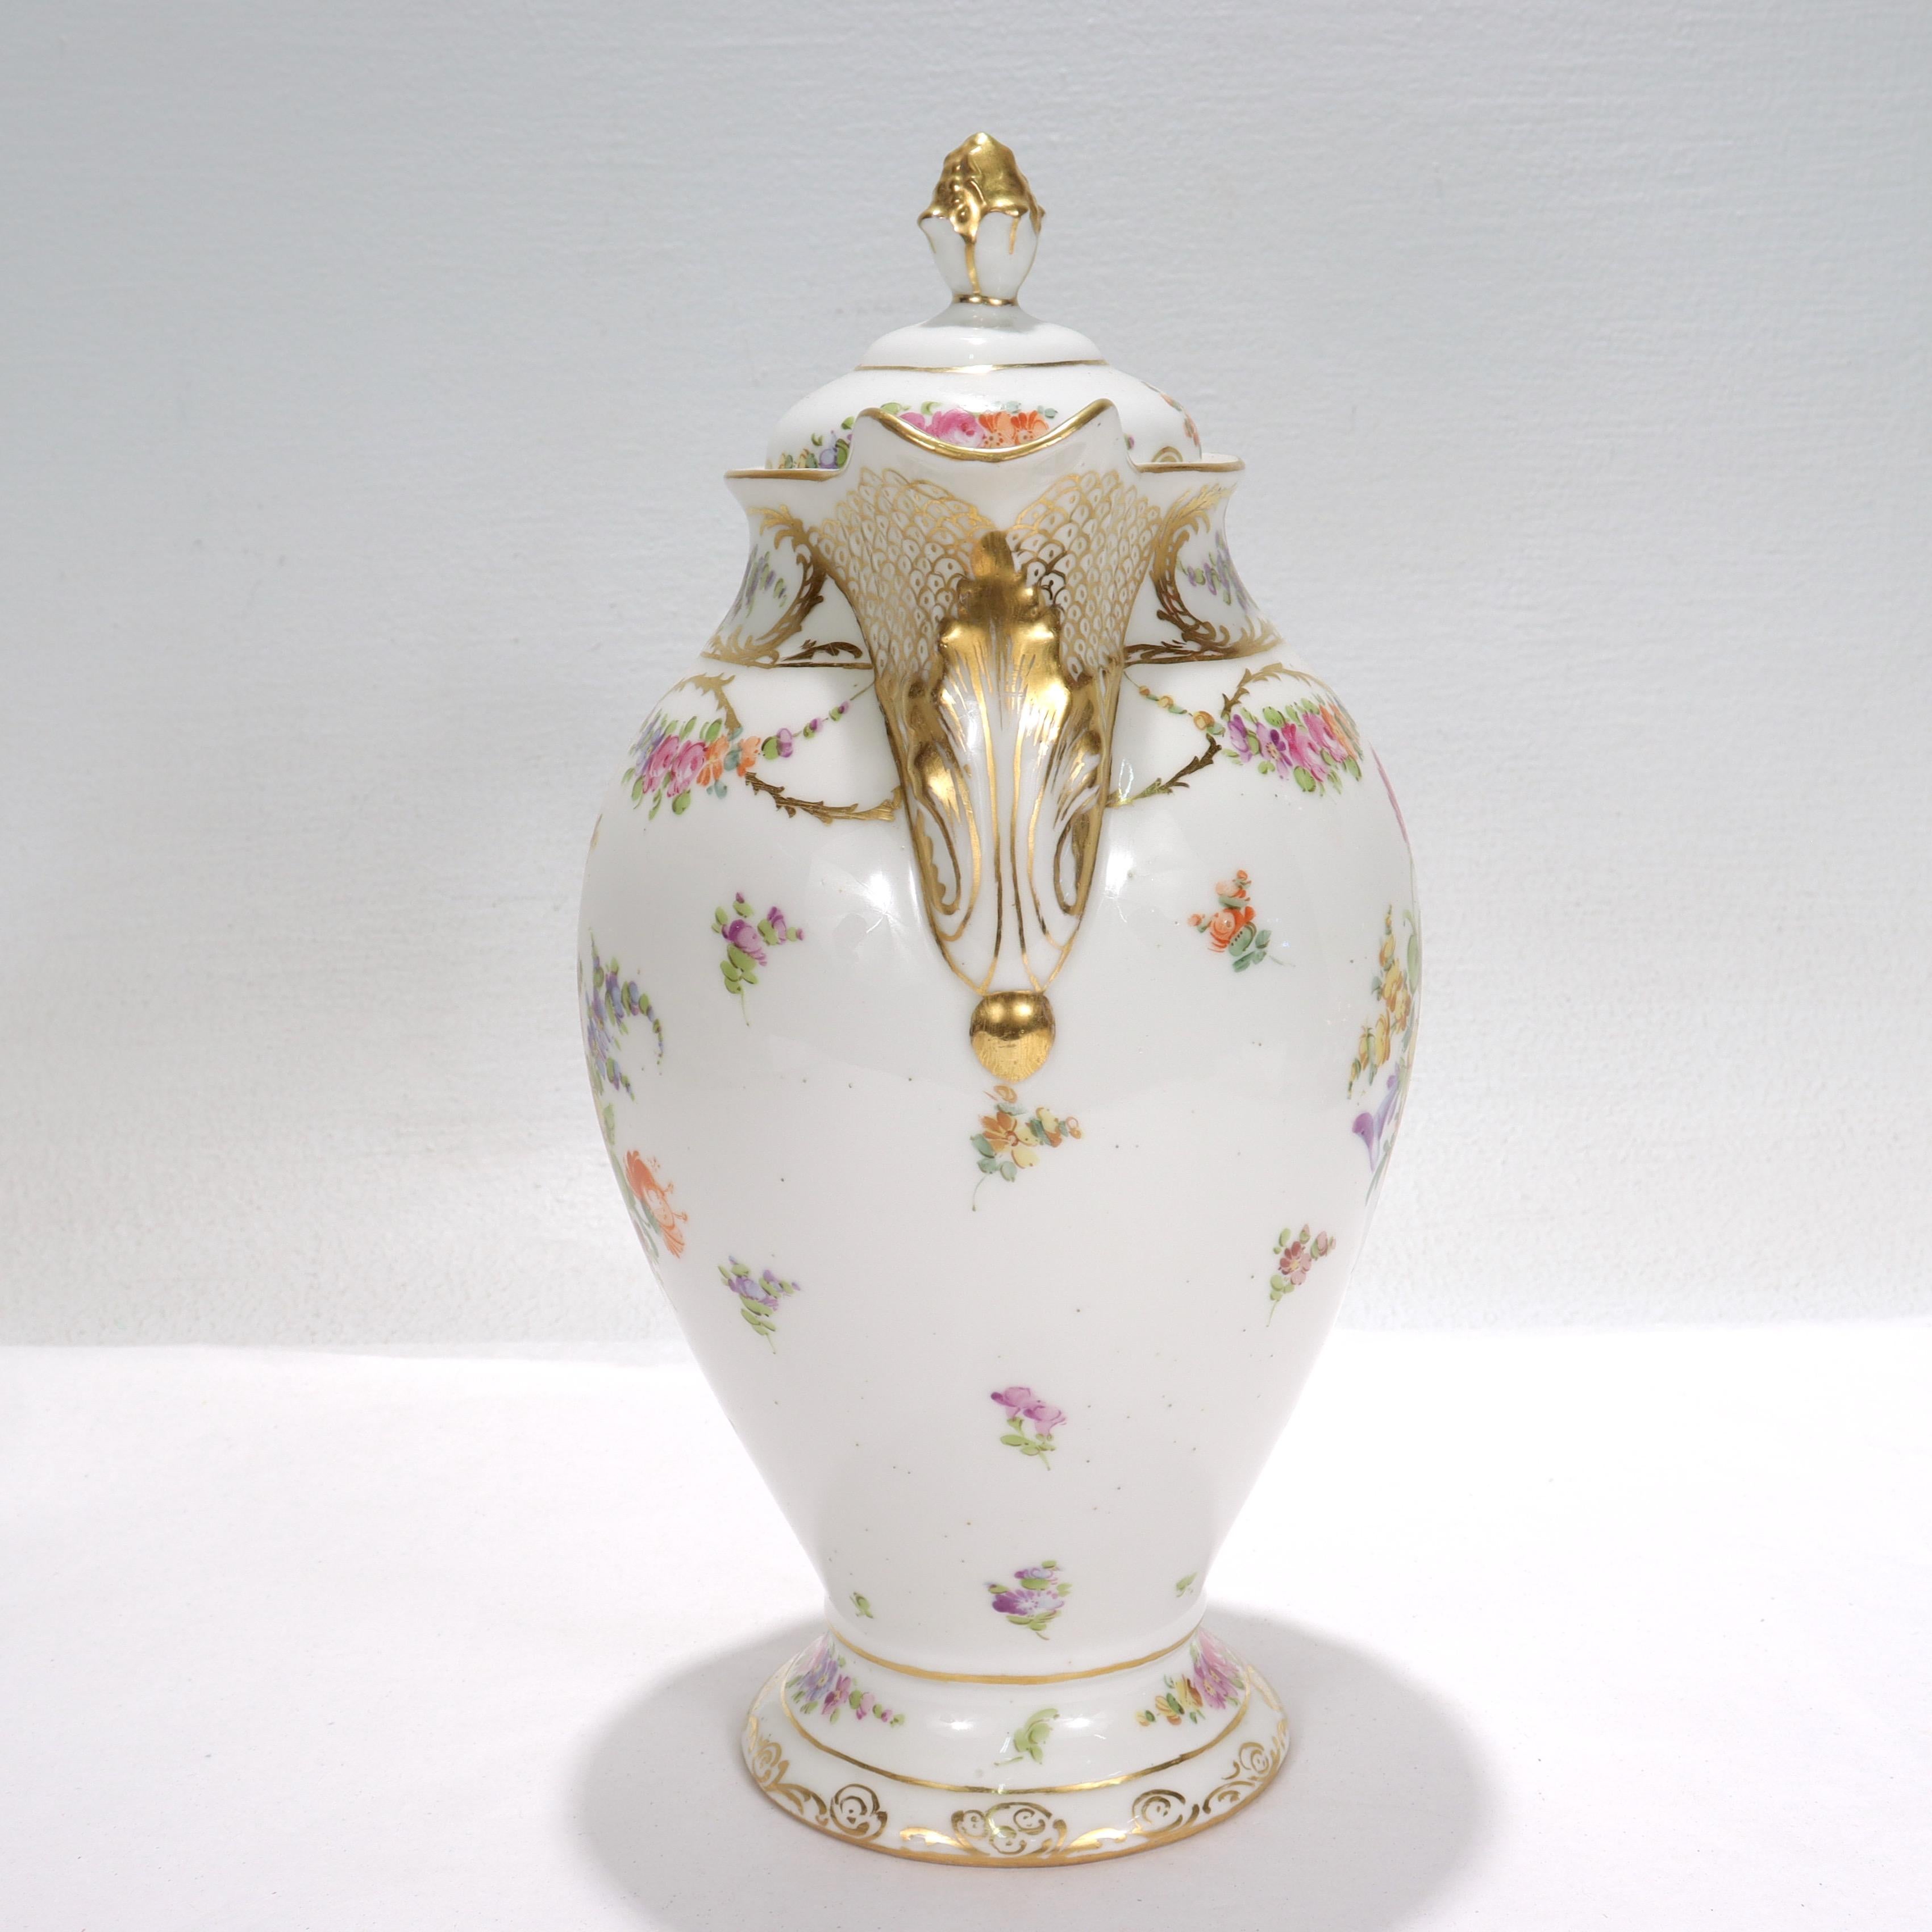 Antique Limoges Dresden Porcelain Chocolate Pot with Handpainted Flowers 1